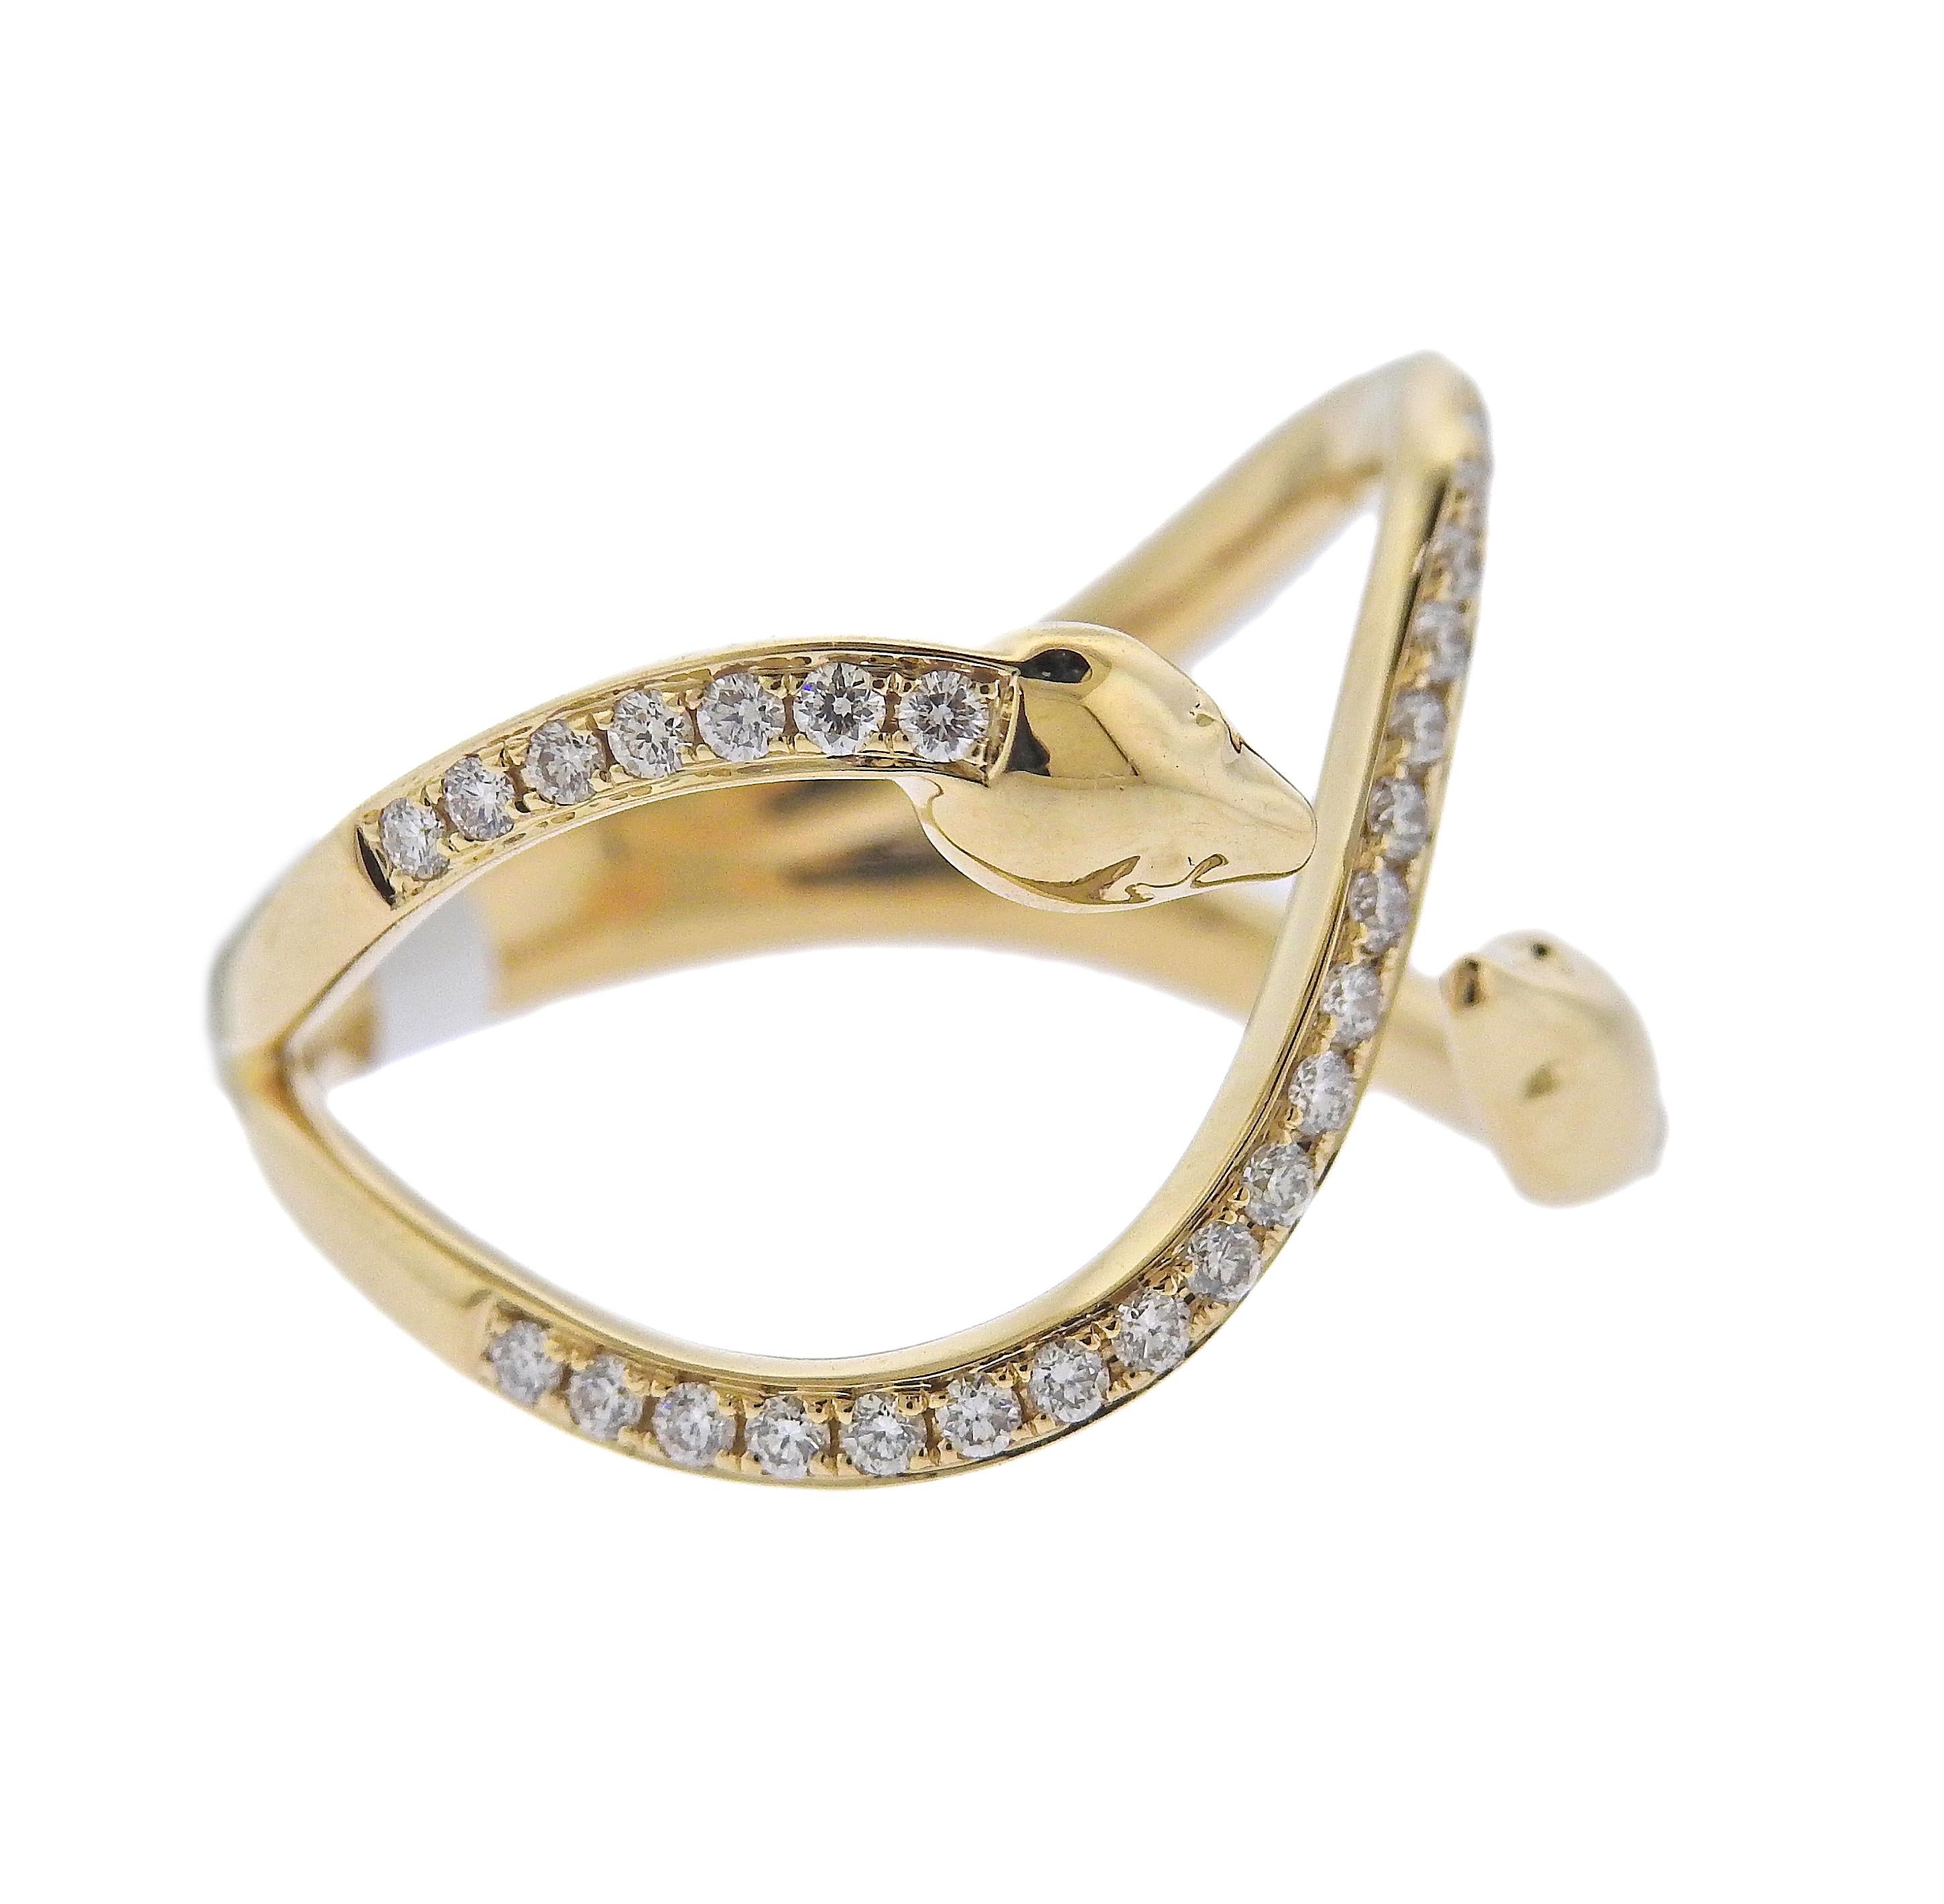 New with tag Doves by Doron Paloma 18k gold Serpent ring with 0.36ctw H/VS diamonds. Ring size 7, top is 15mm wide. Weight - 4.6 grams. Marked: 18k, Dove mark. 